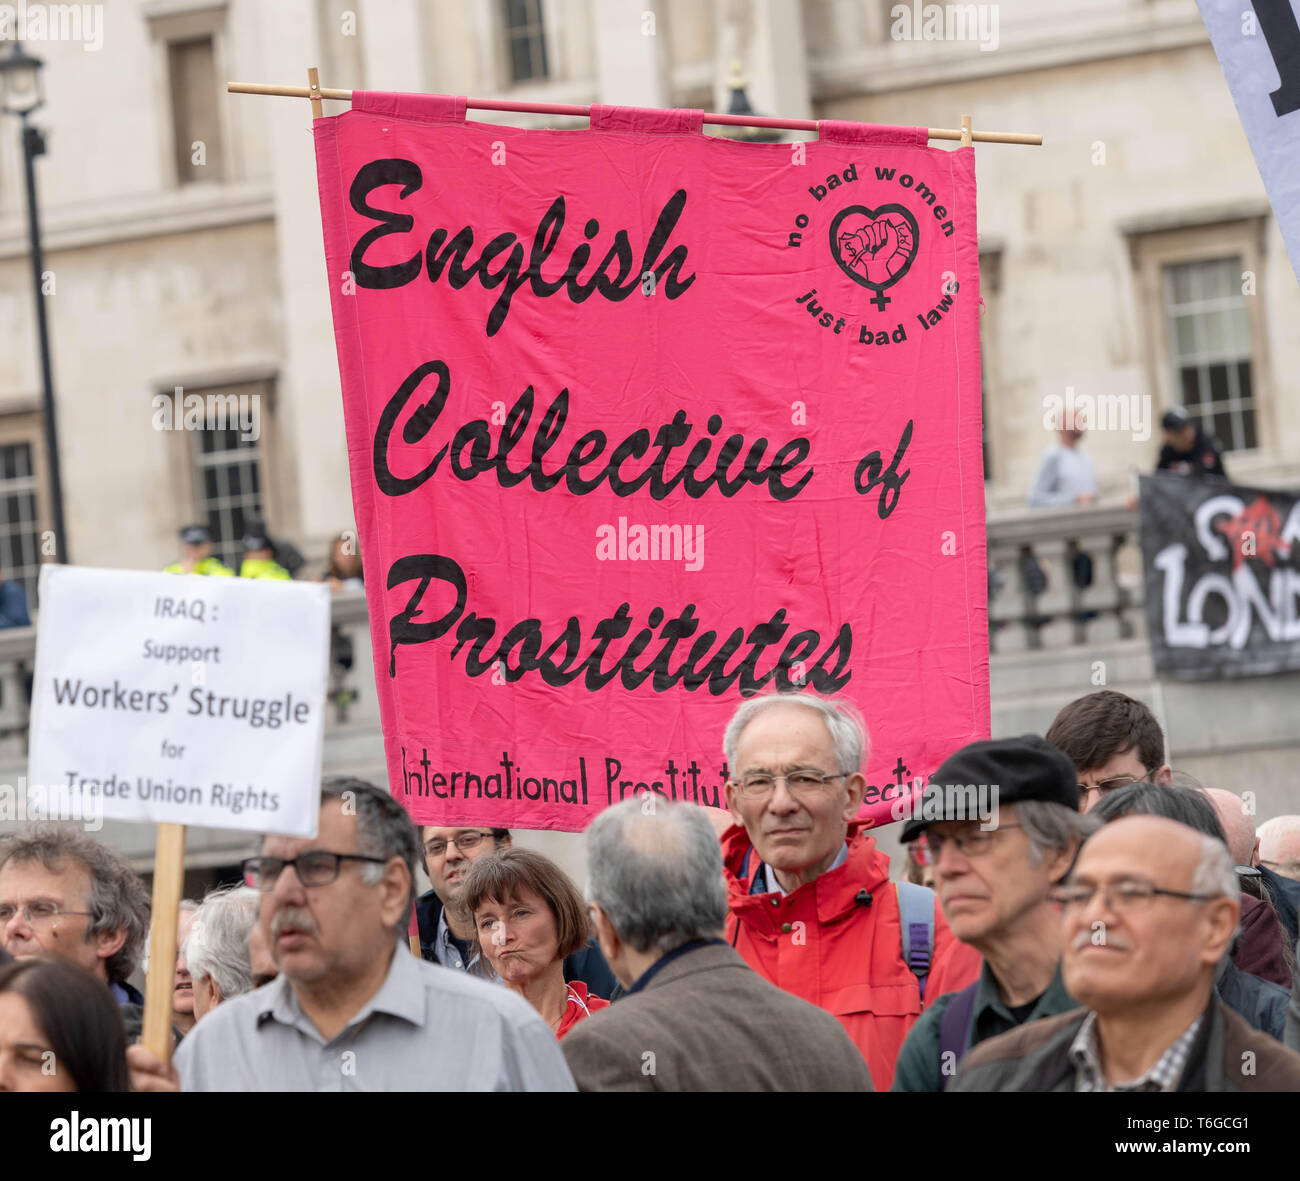 London, UK. 1st May 2019. May Day Labour rally and March with Trade Unions and international organsiations celebrating Labour Day in Trafalgar Square English collective of prostitutes banner Credit: Ian Davidson/Alamy Live News Stock Photo